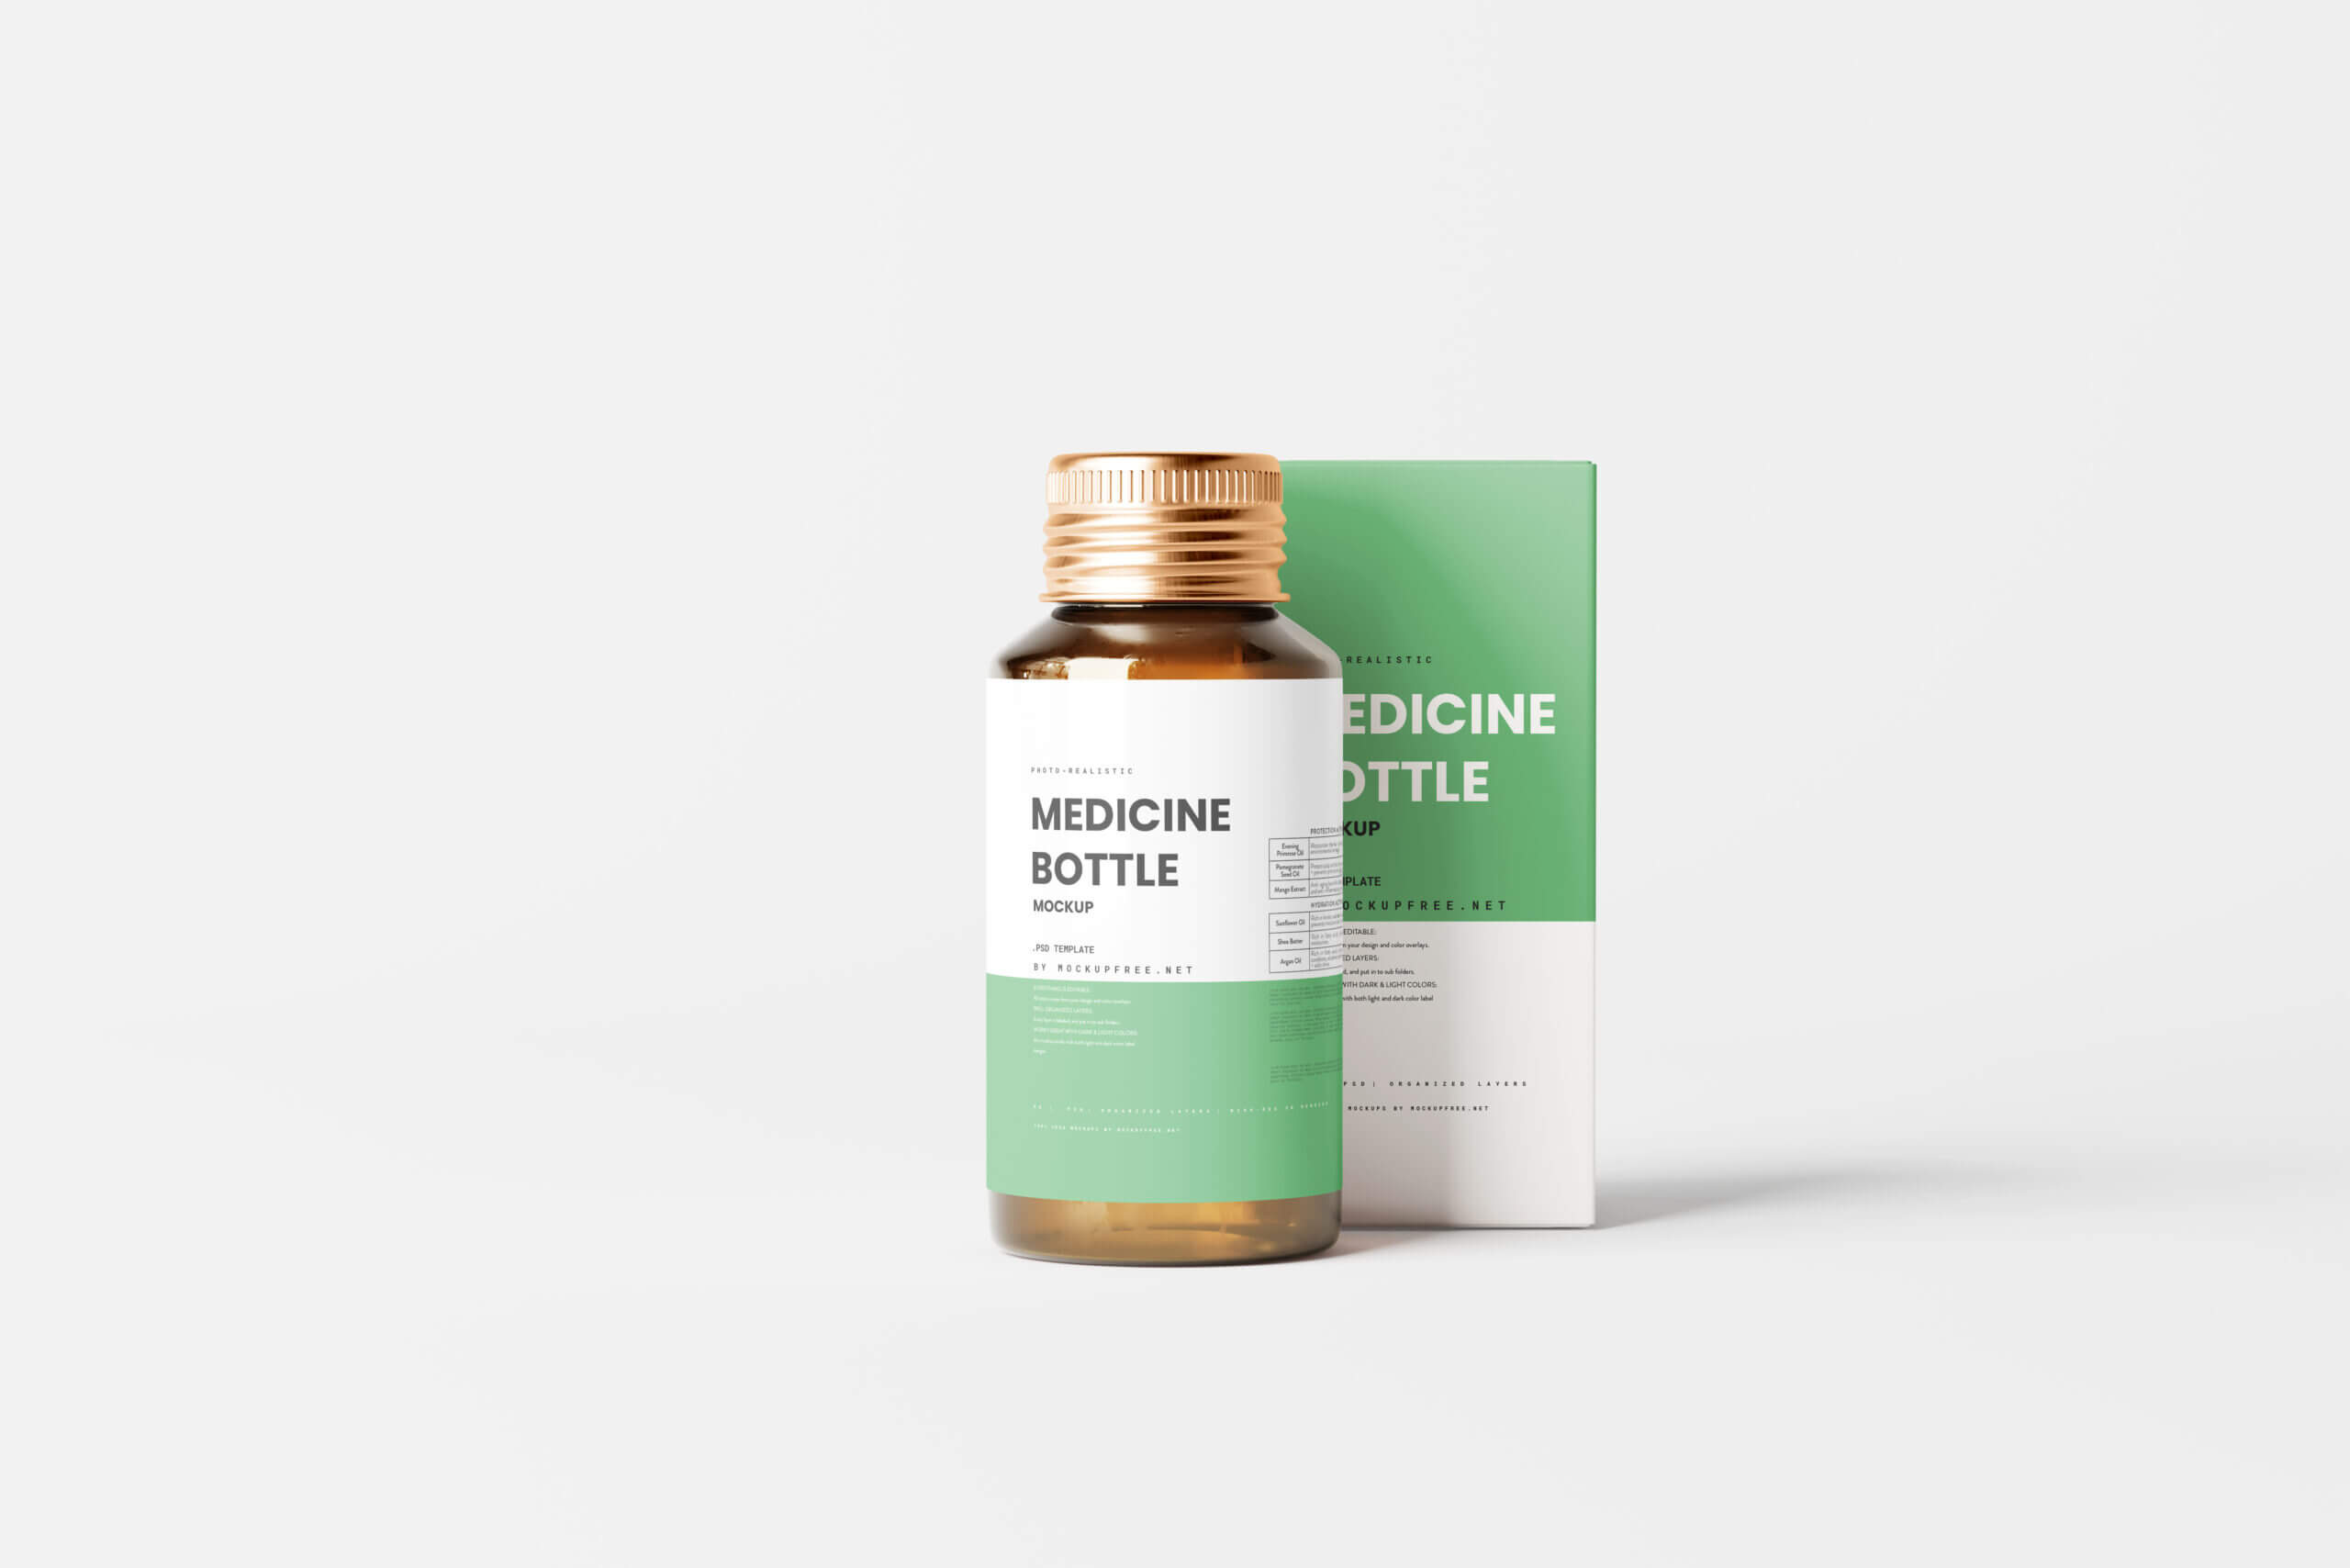 10 Free Amber Medicine Bottle With Box Mockup PSD Files